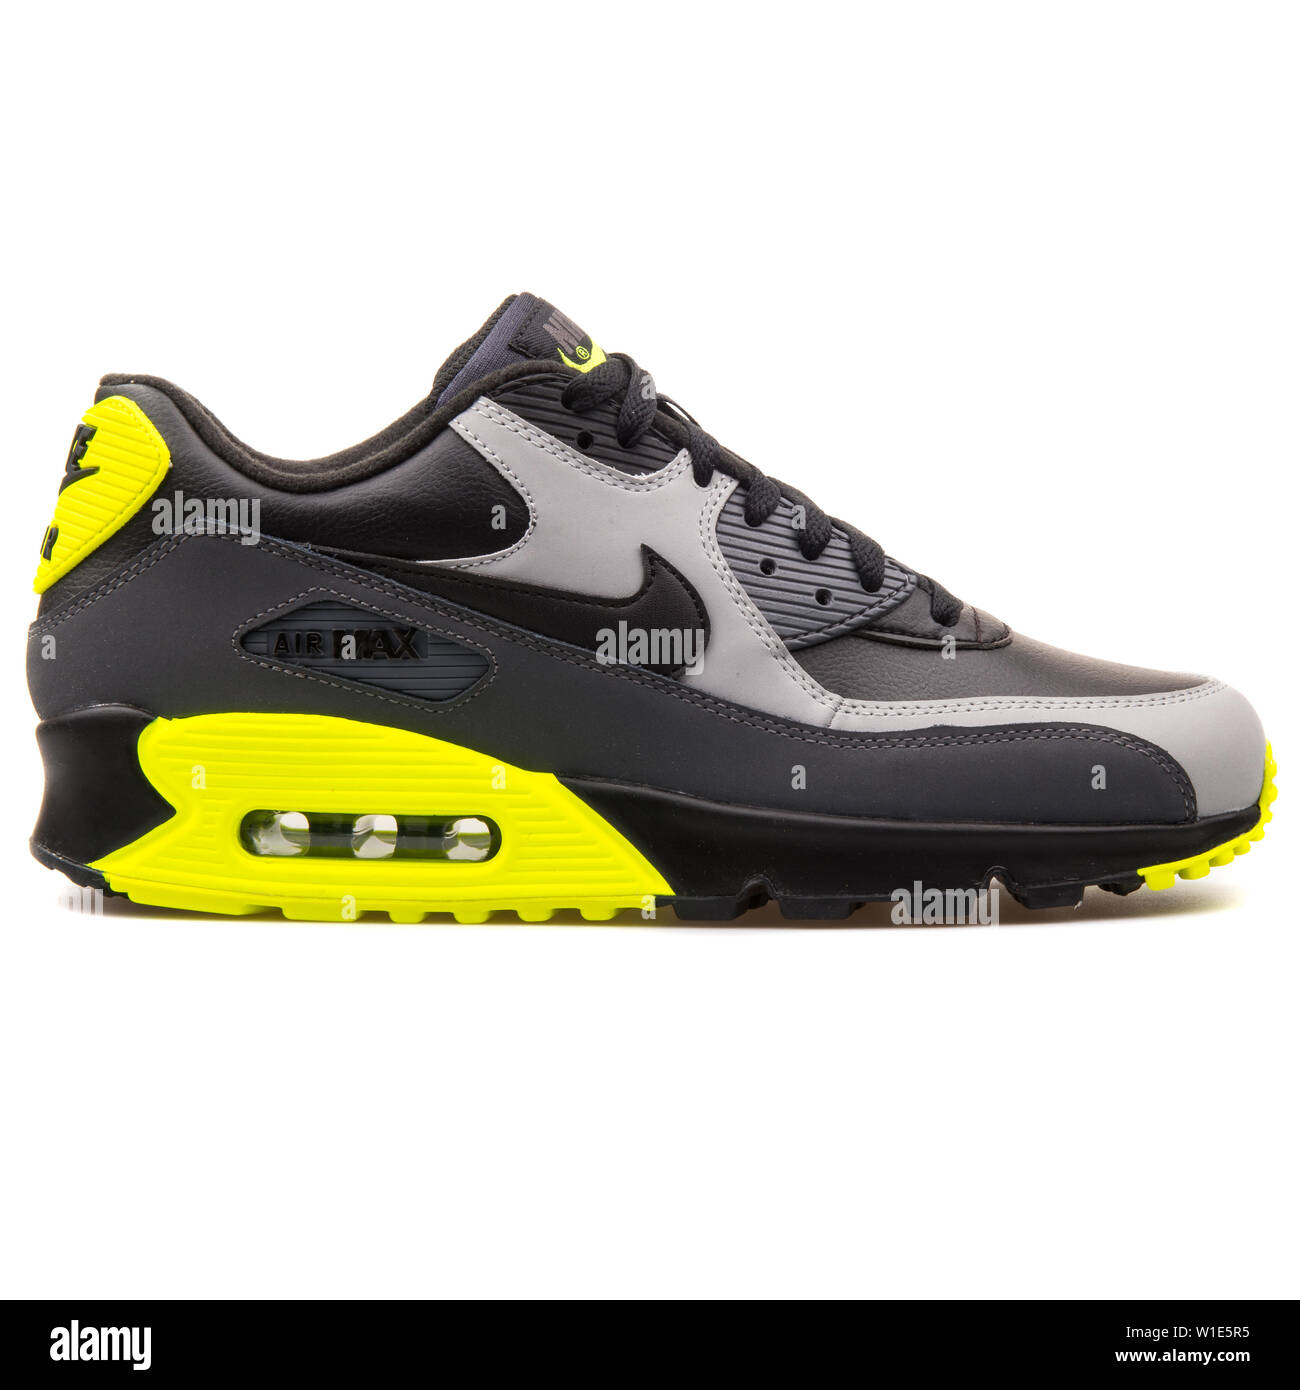 VIENNA, AUSTRIA - AUGUST 25, 2017: Nike Air Max 90 Leather black, grey and  yellow sneaker on white background Stock Photo - Alamy